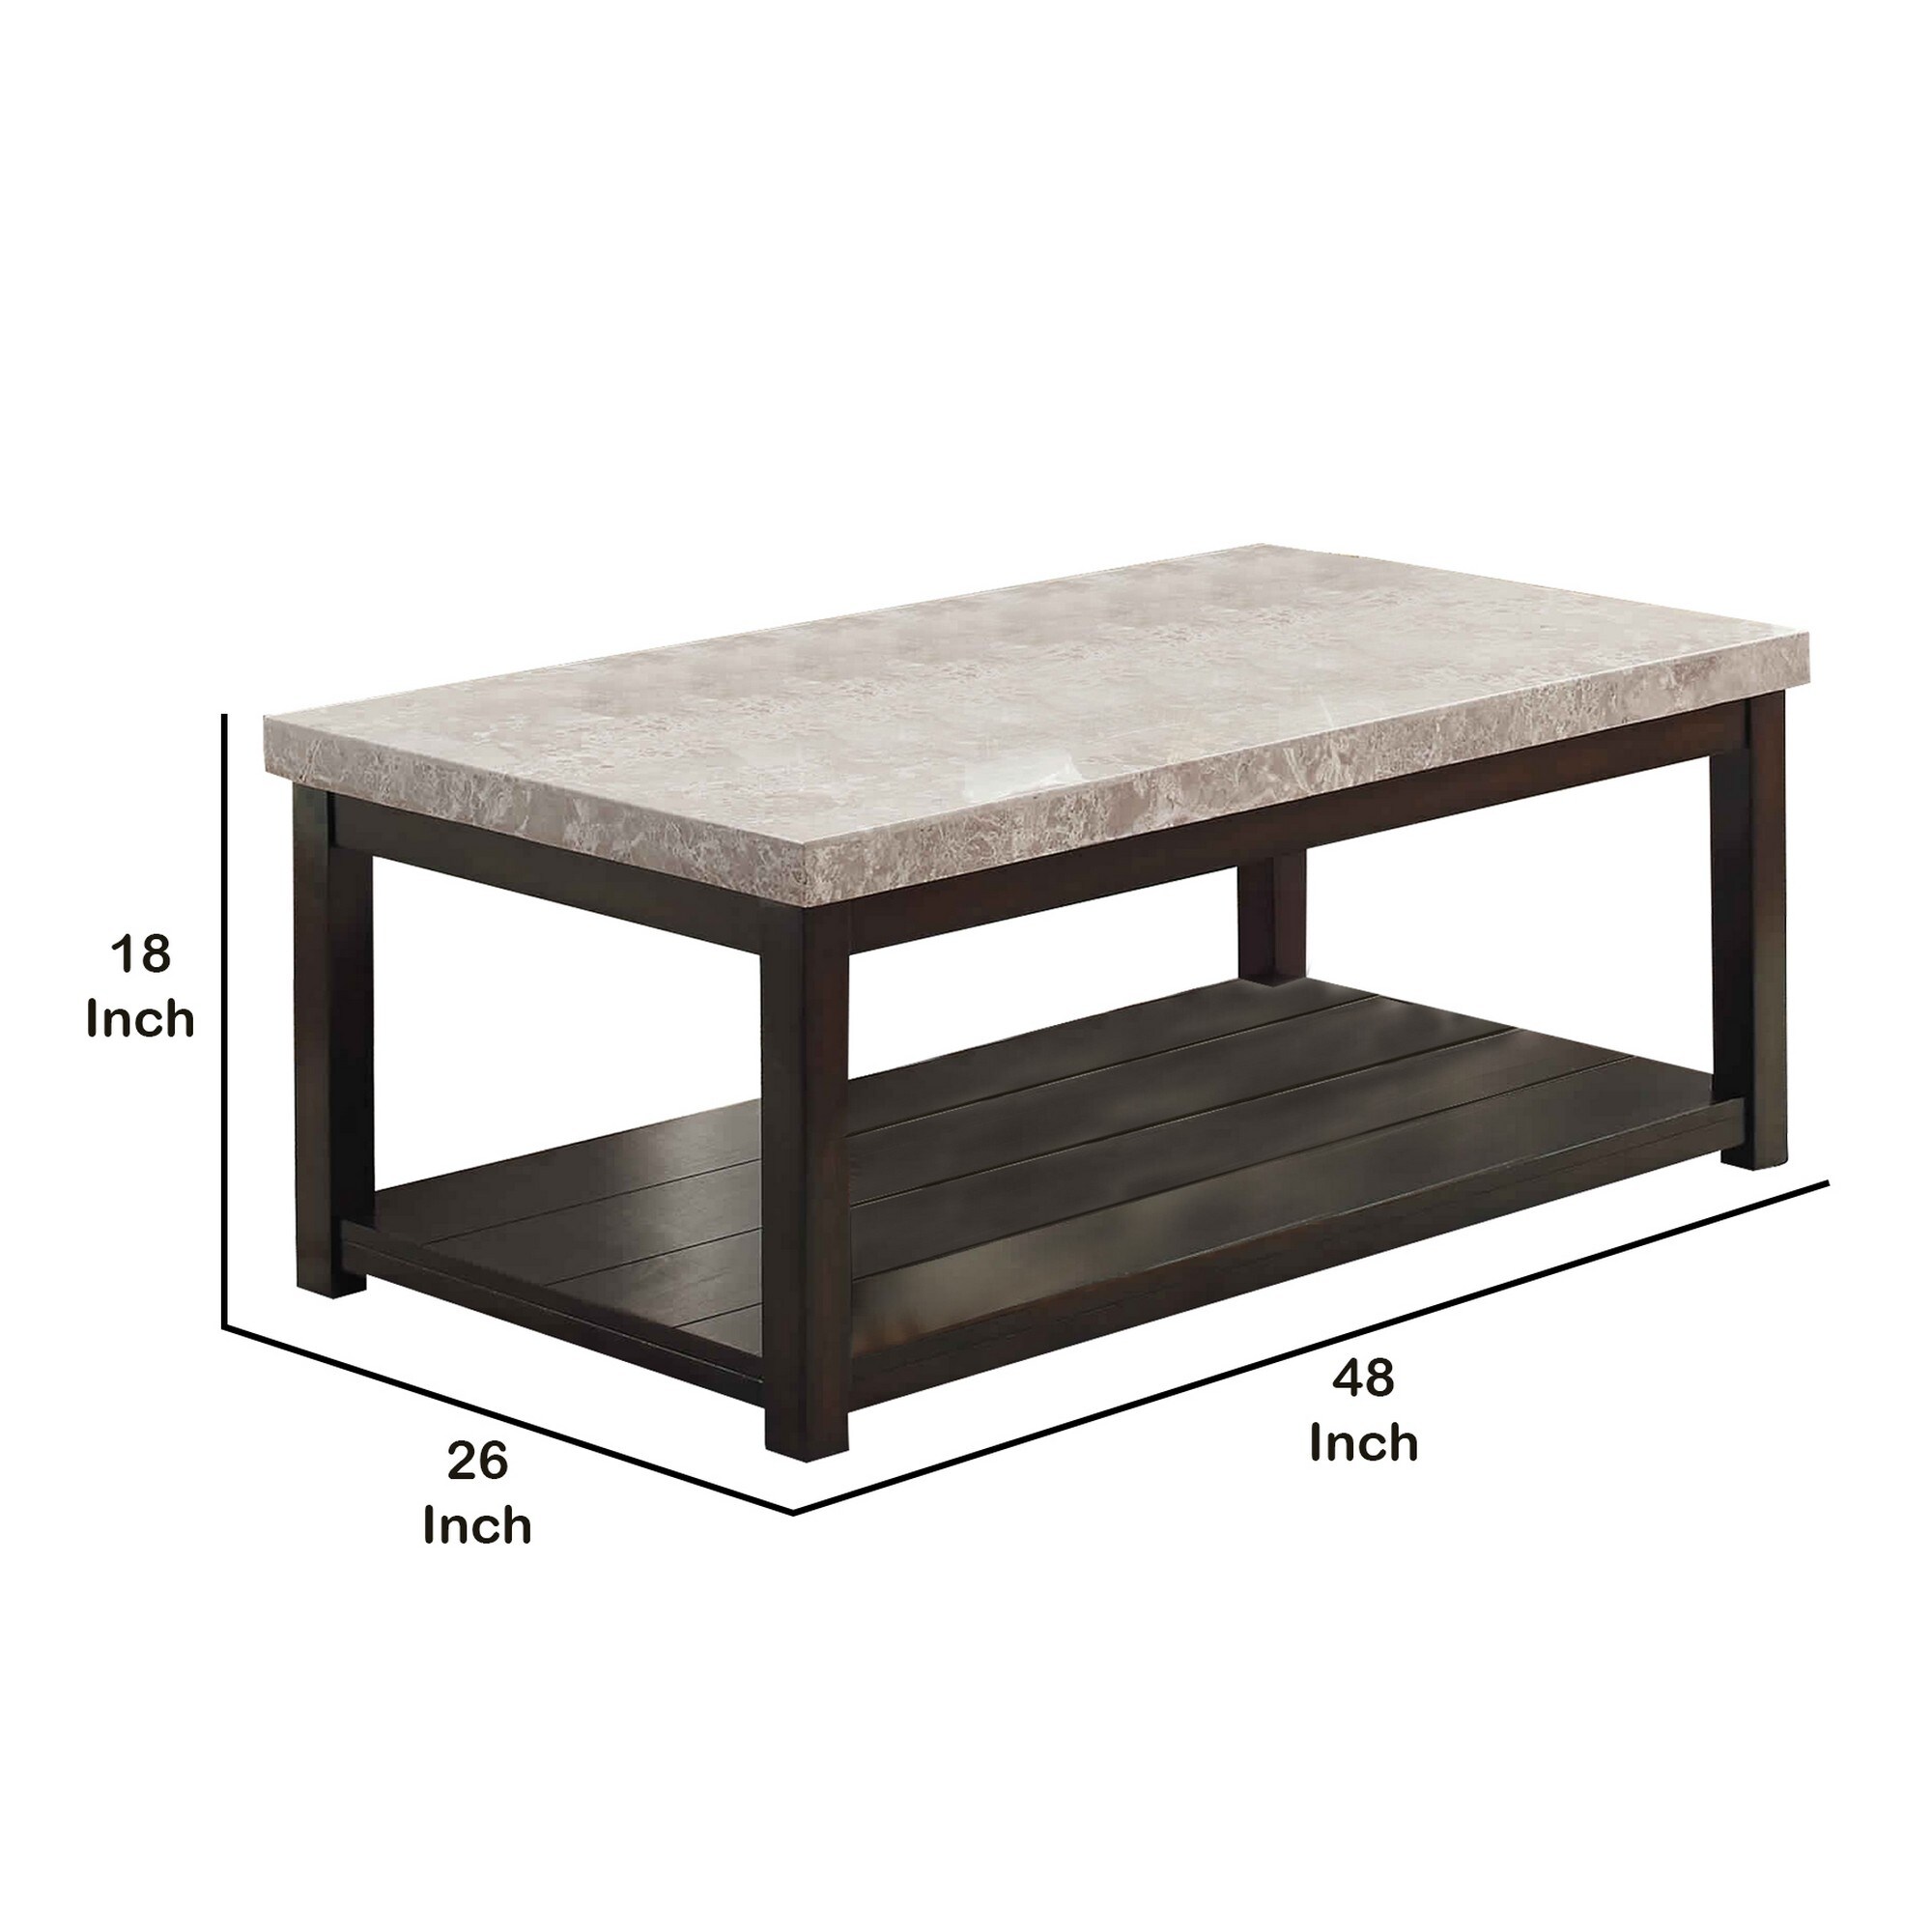 Transitional Coffee Table With Marble Top And Open Bottom Shelf